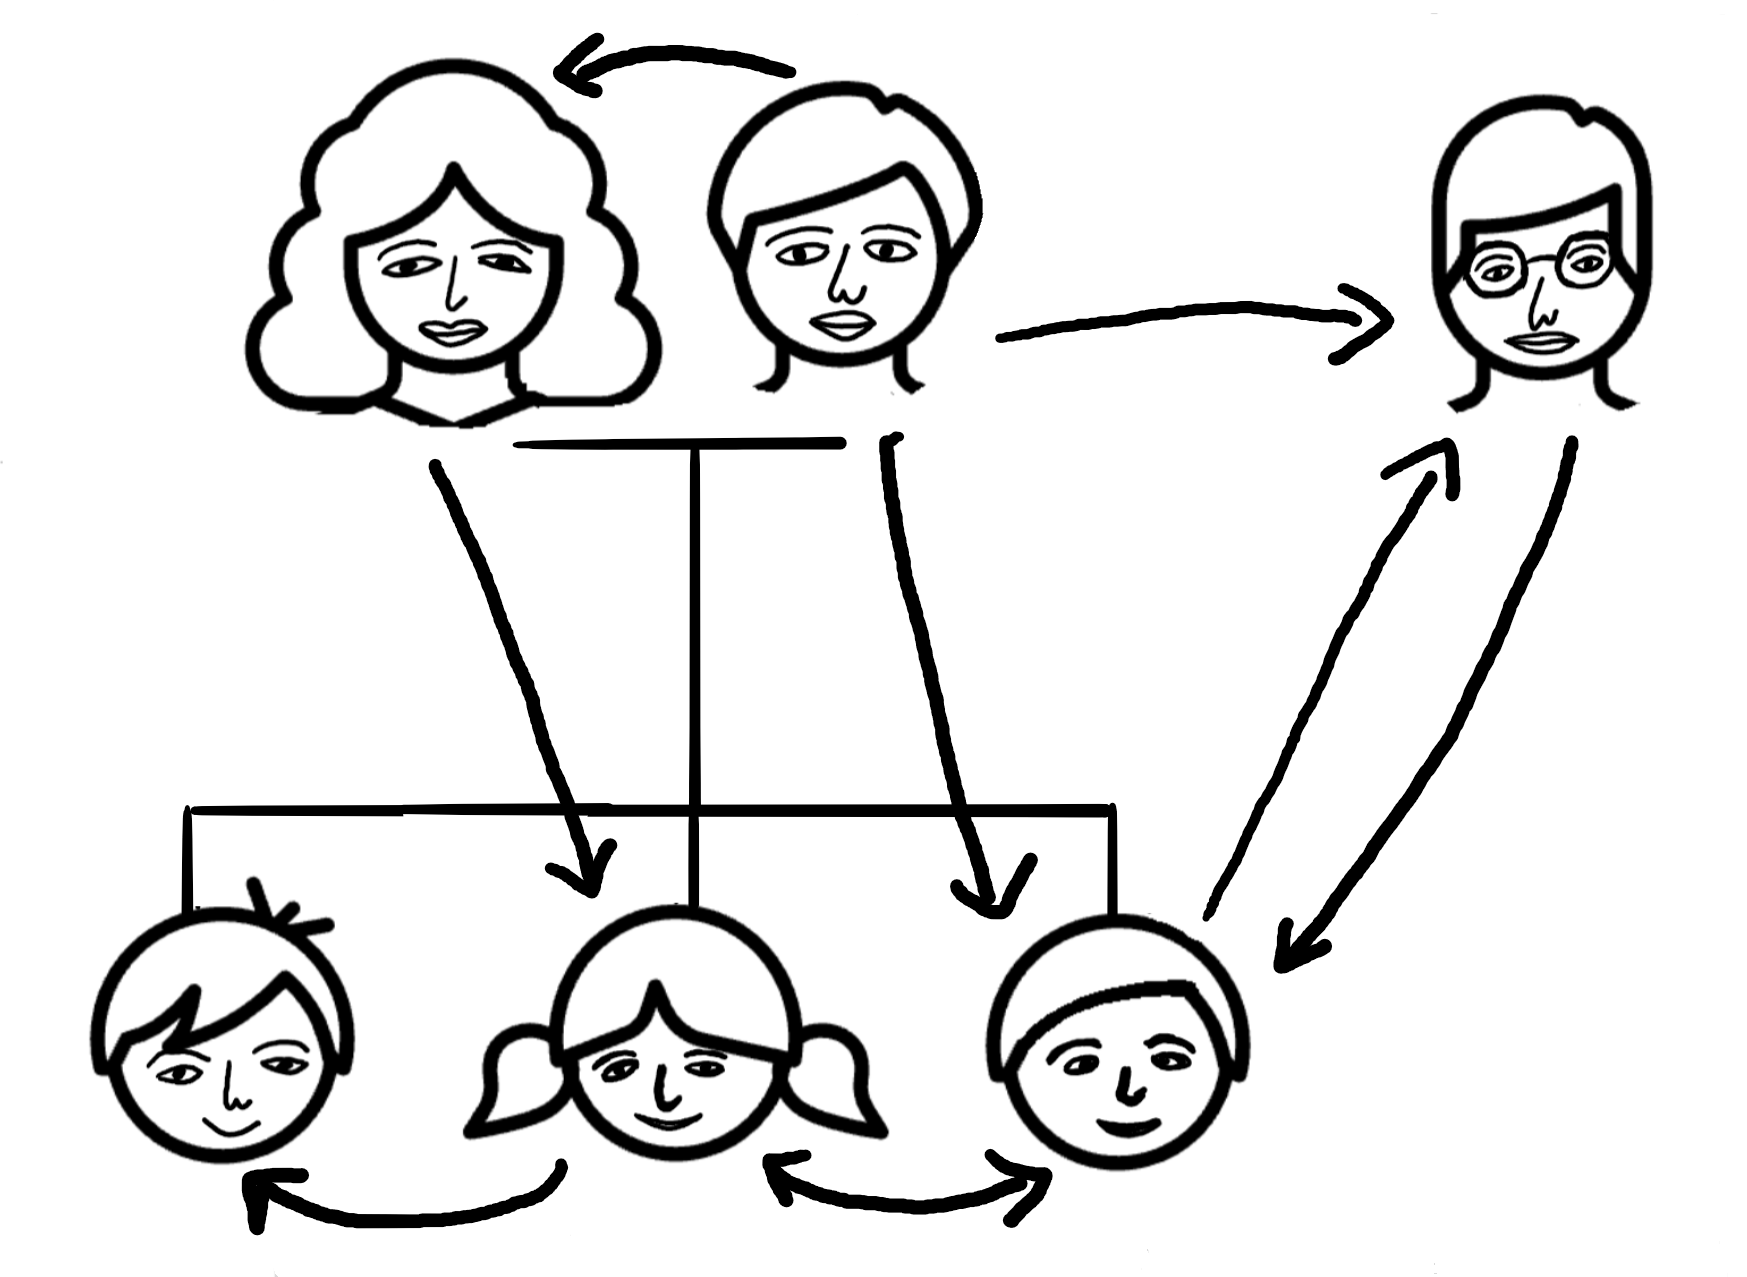 The same family tree is copied again, except arrows go both directions between the uncle and a nephew, and from the husband to his wife.